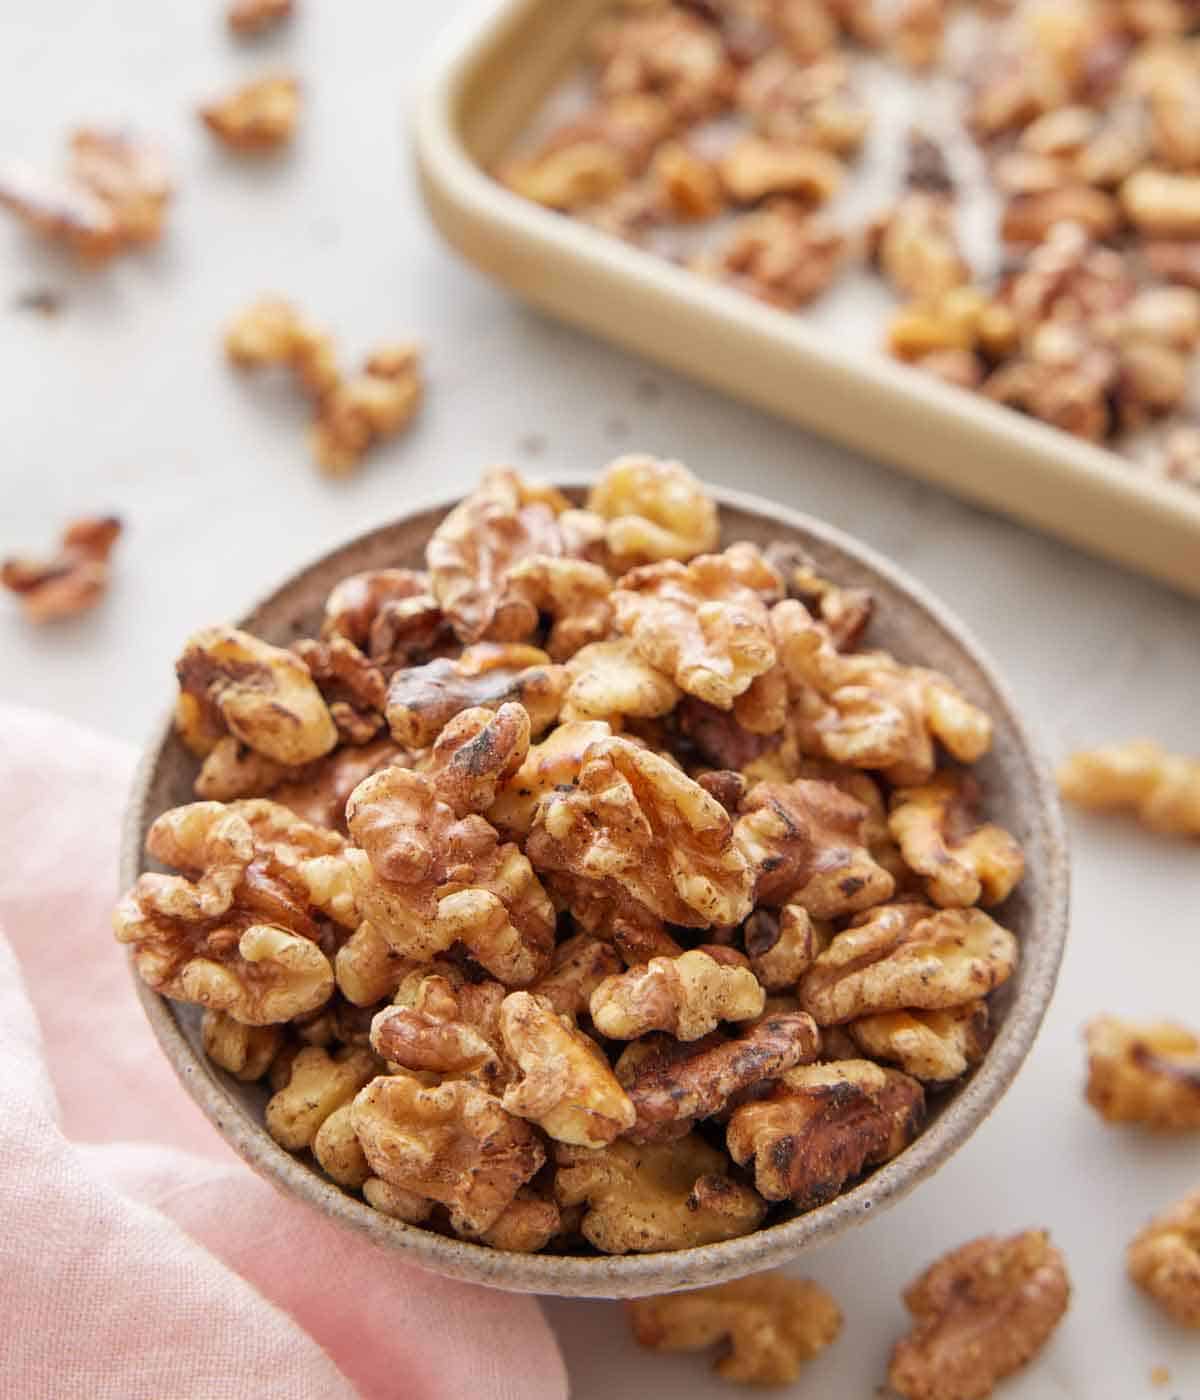 A bowl of toasted walnuts with a sheet pan in the background with more walnuts scattered.